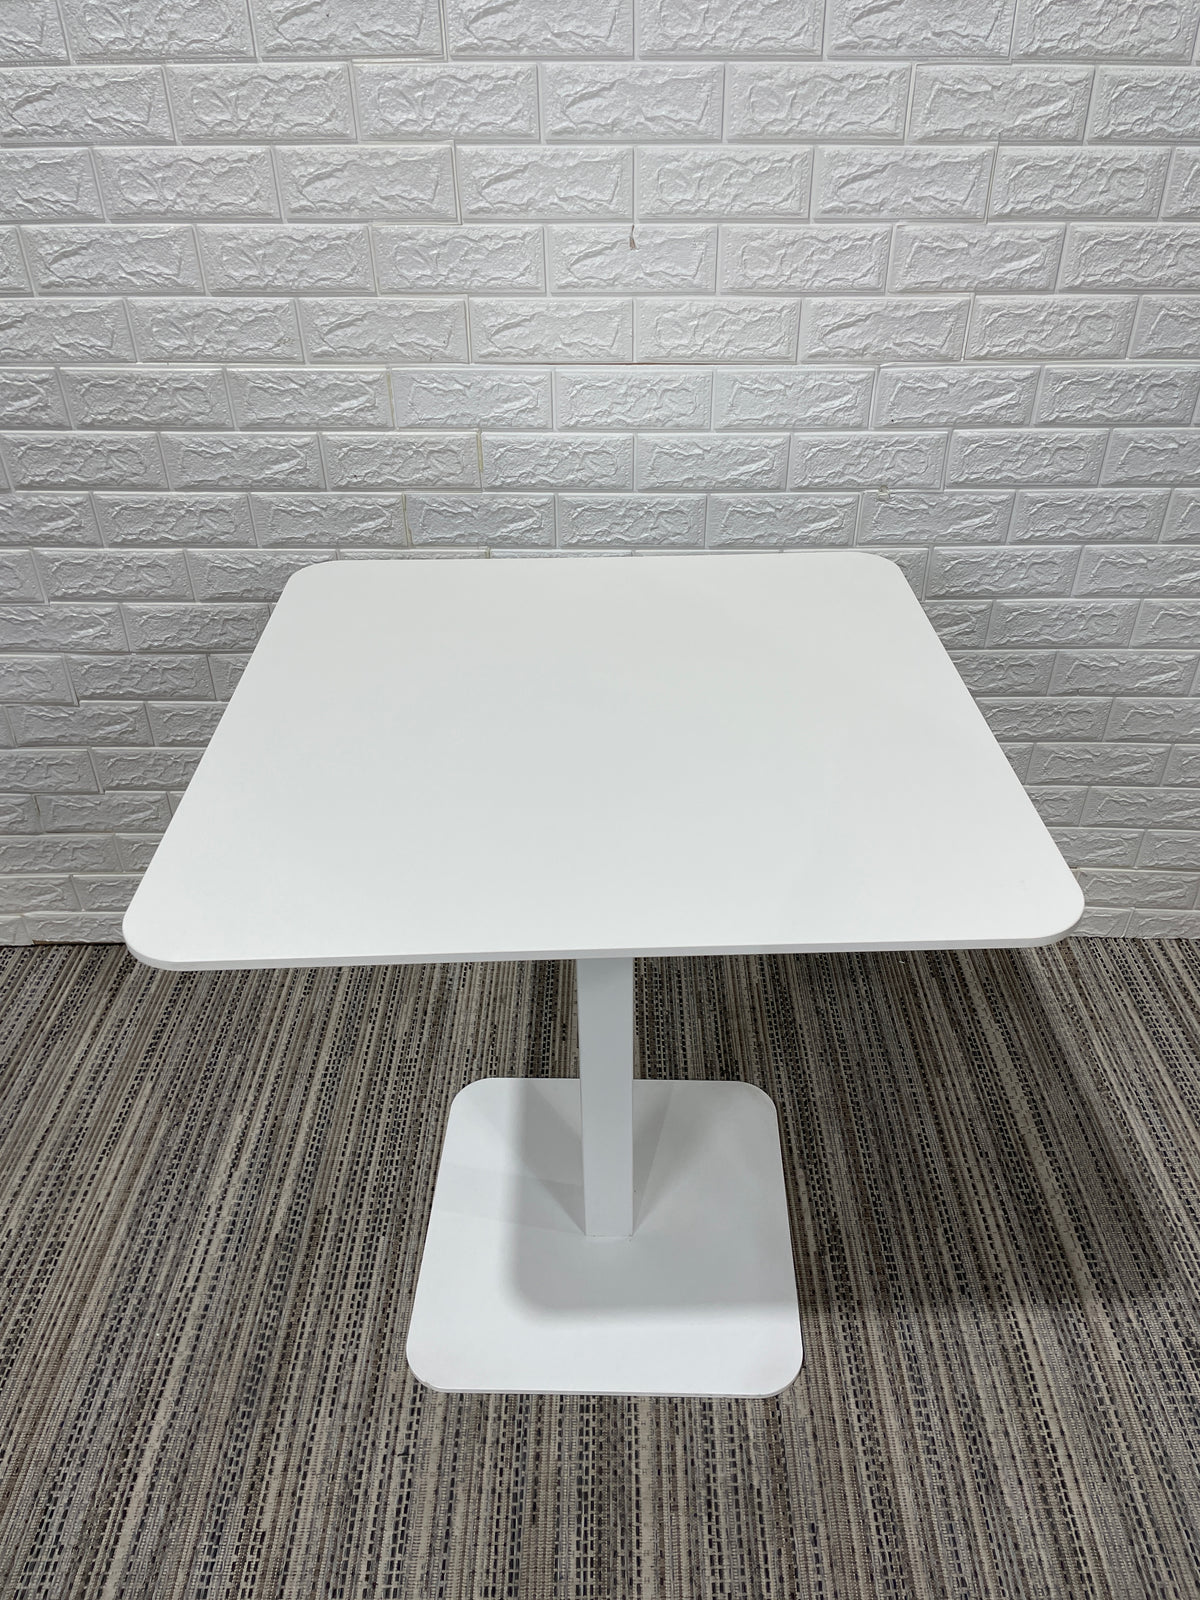 Pre-Owned Bar Height White Square Table - Duckys Office Furniture